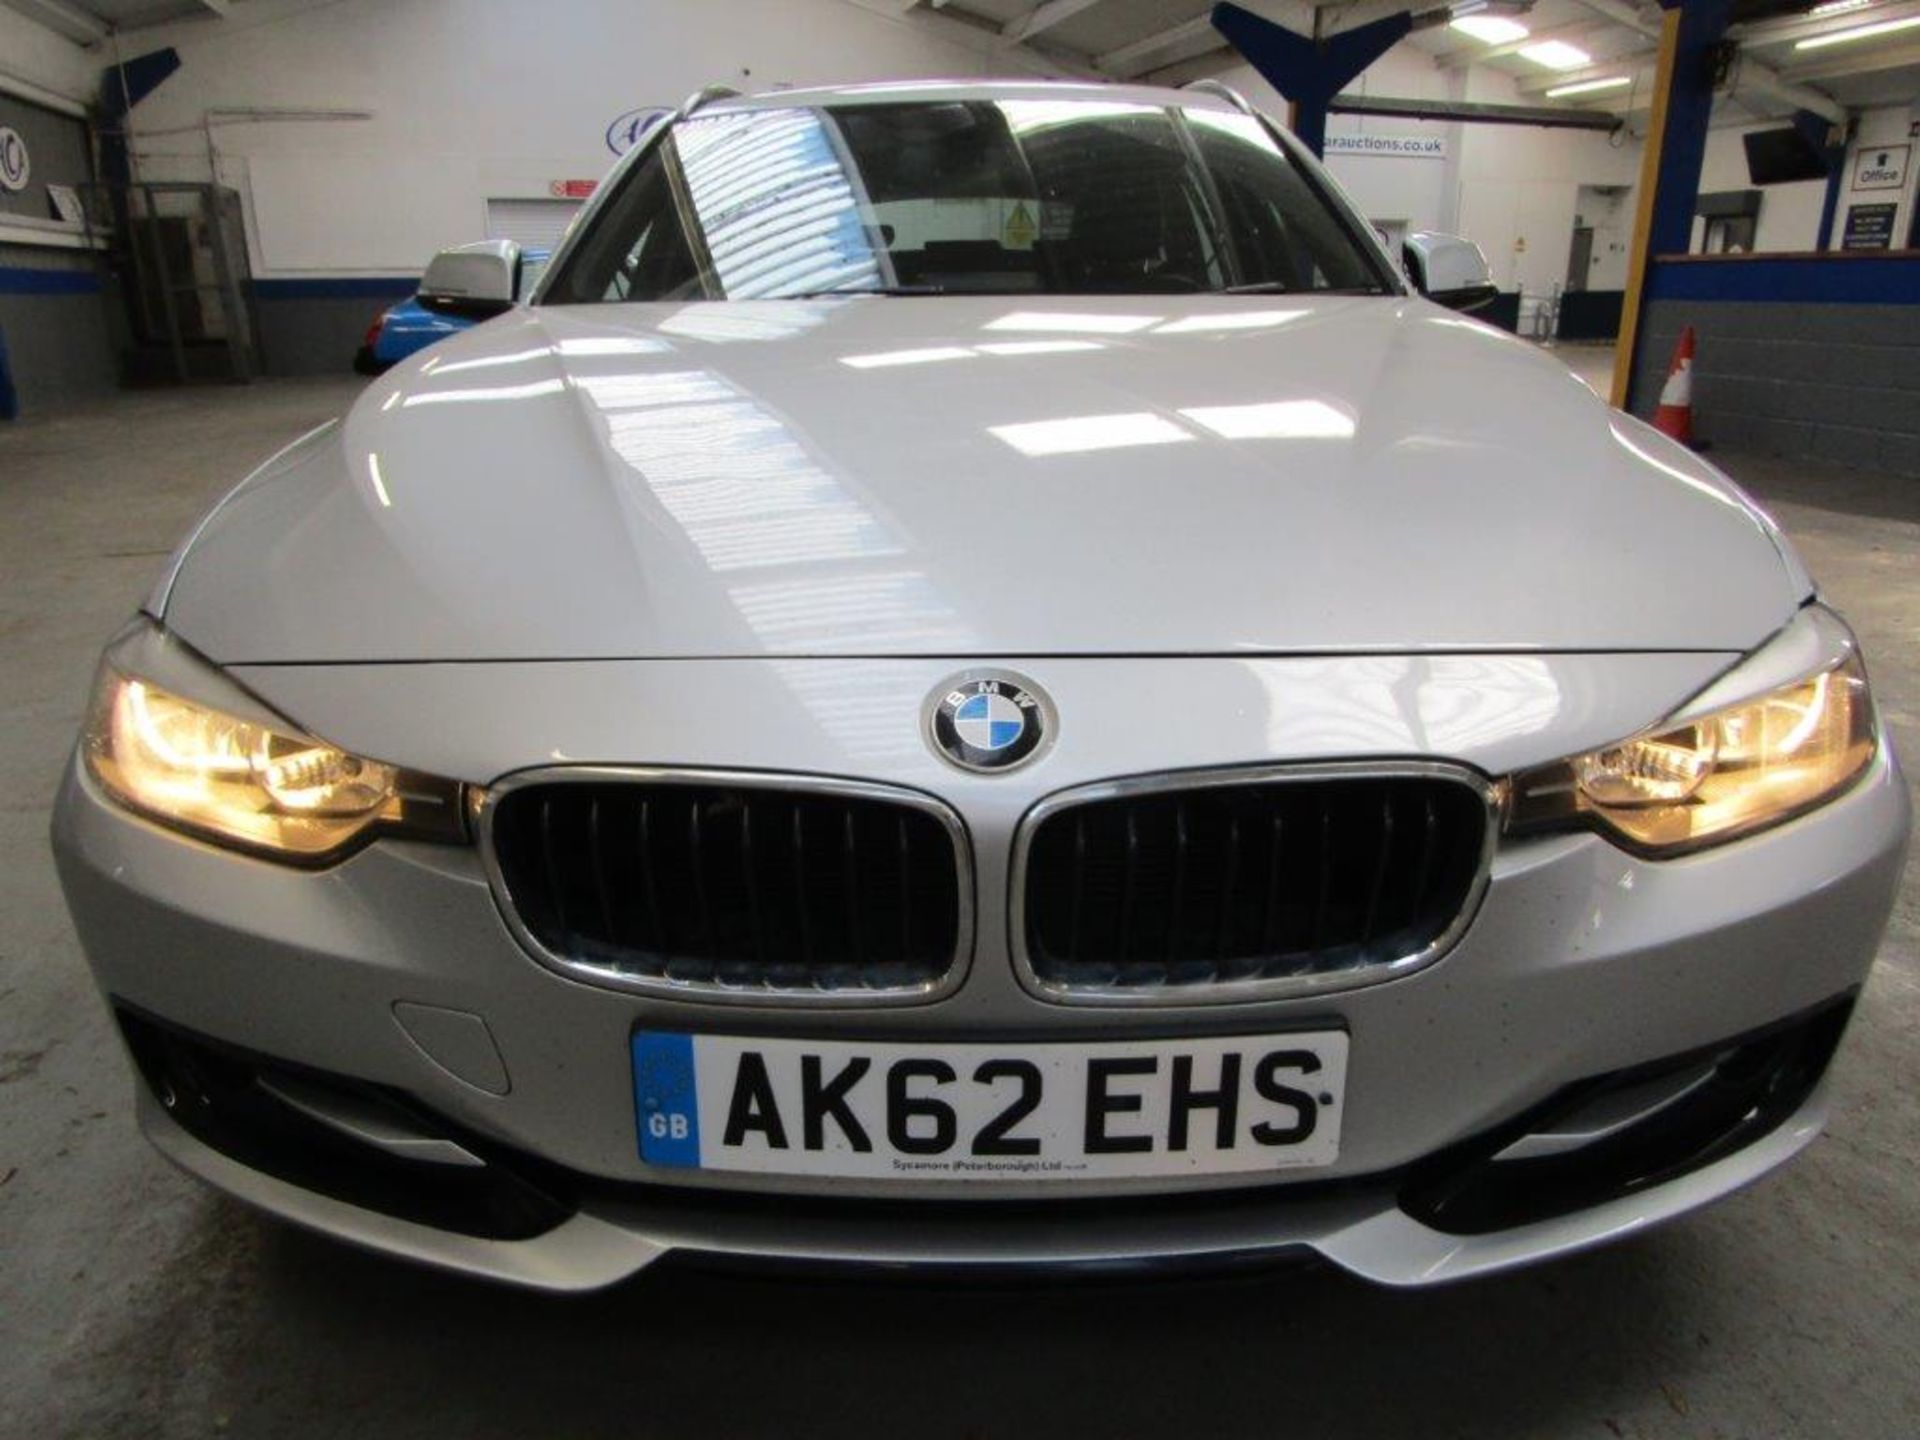 62 12 BMW 320D Sport Touring - Image 2 of 29